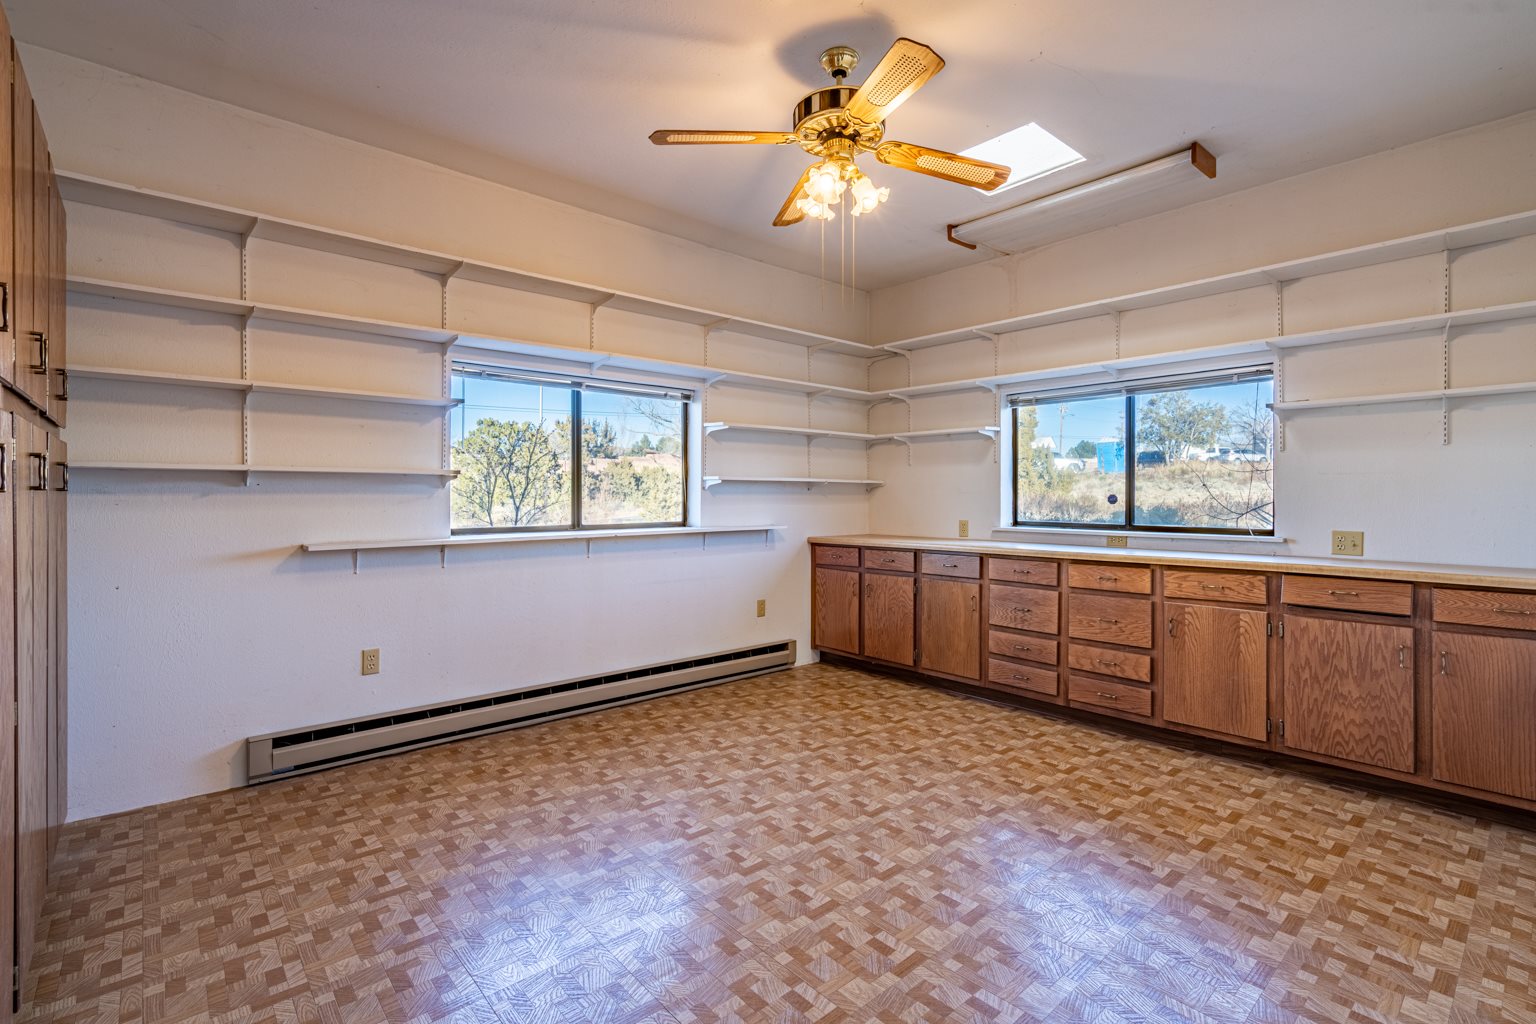 3924 Rodeo, Santa Fe, New Mexico 87507, ,Land,For Sale,3924 Rodeo,202000004